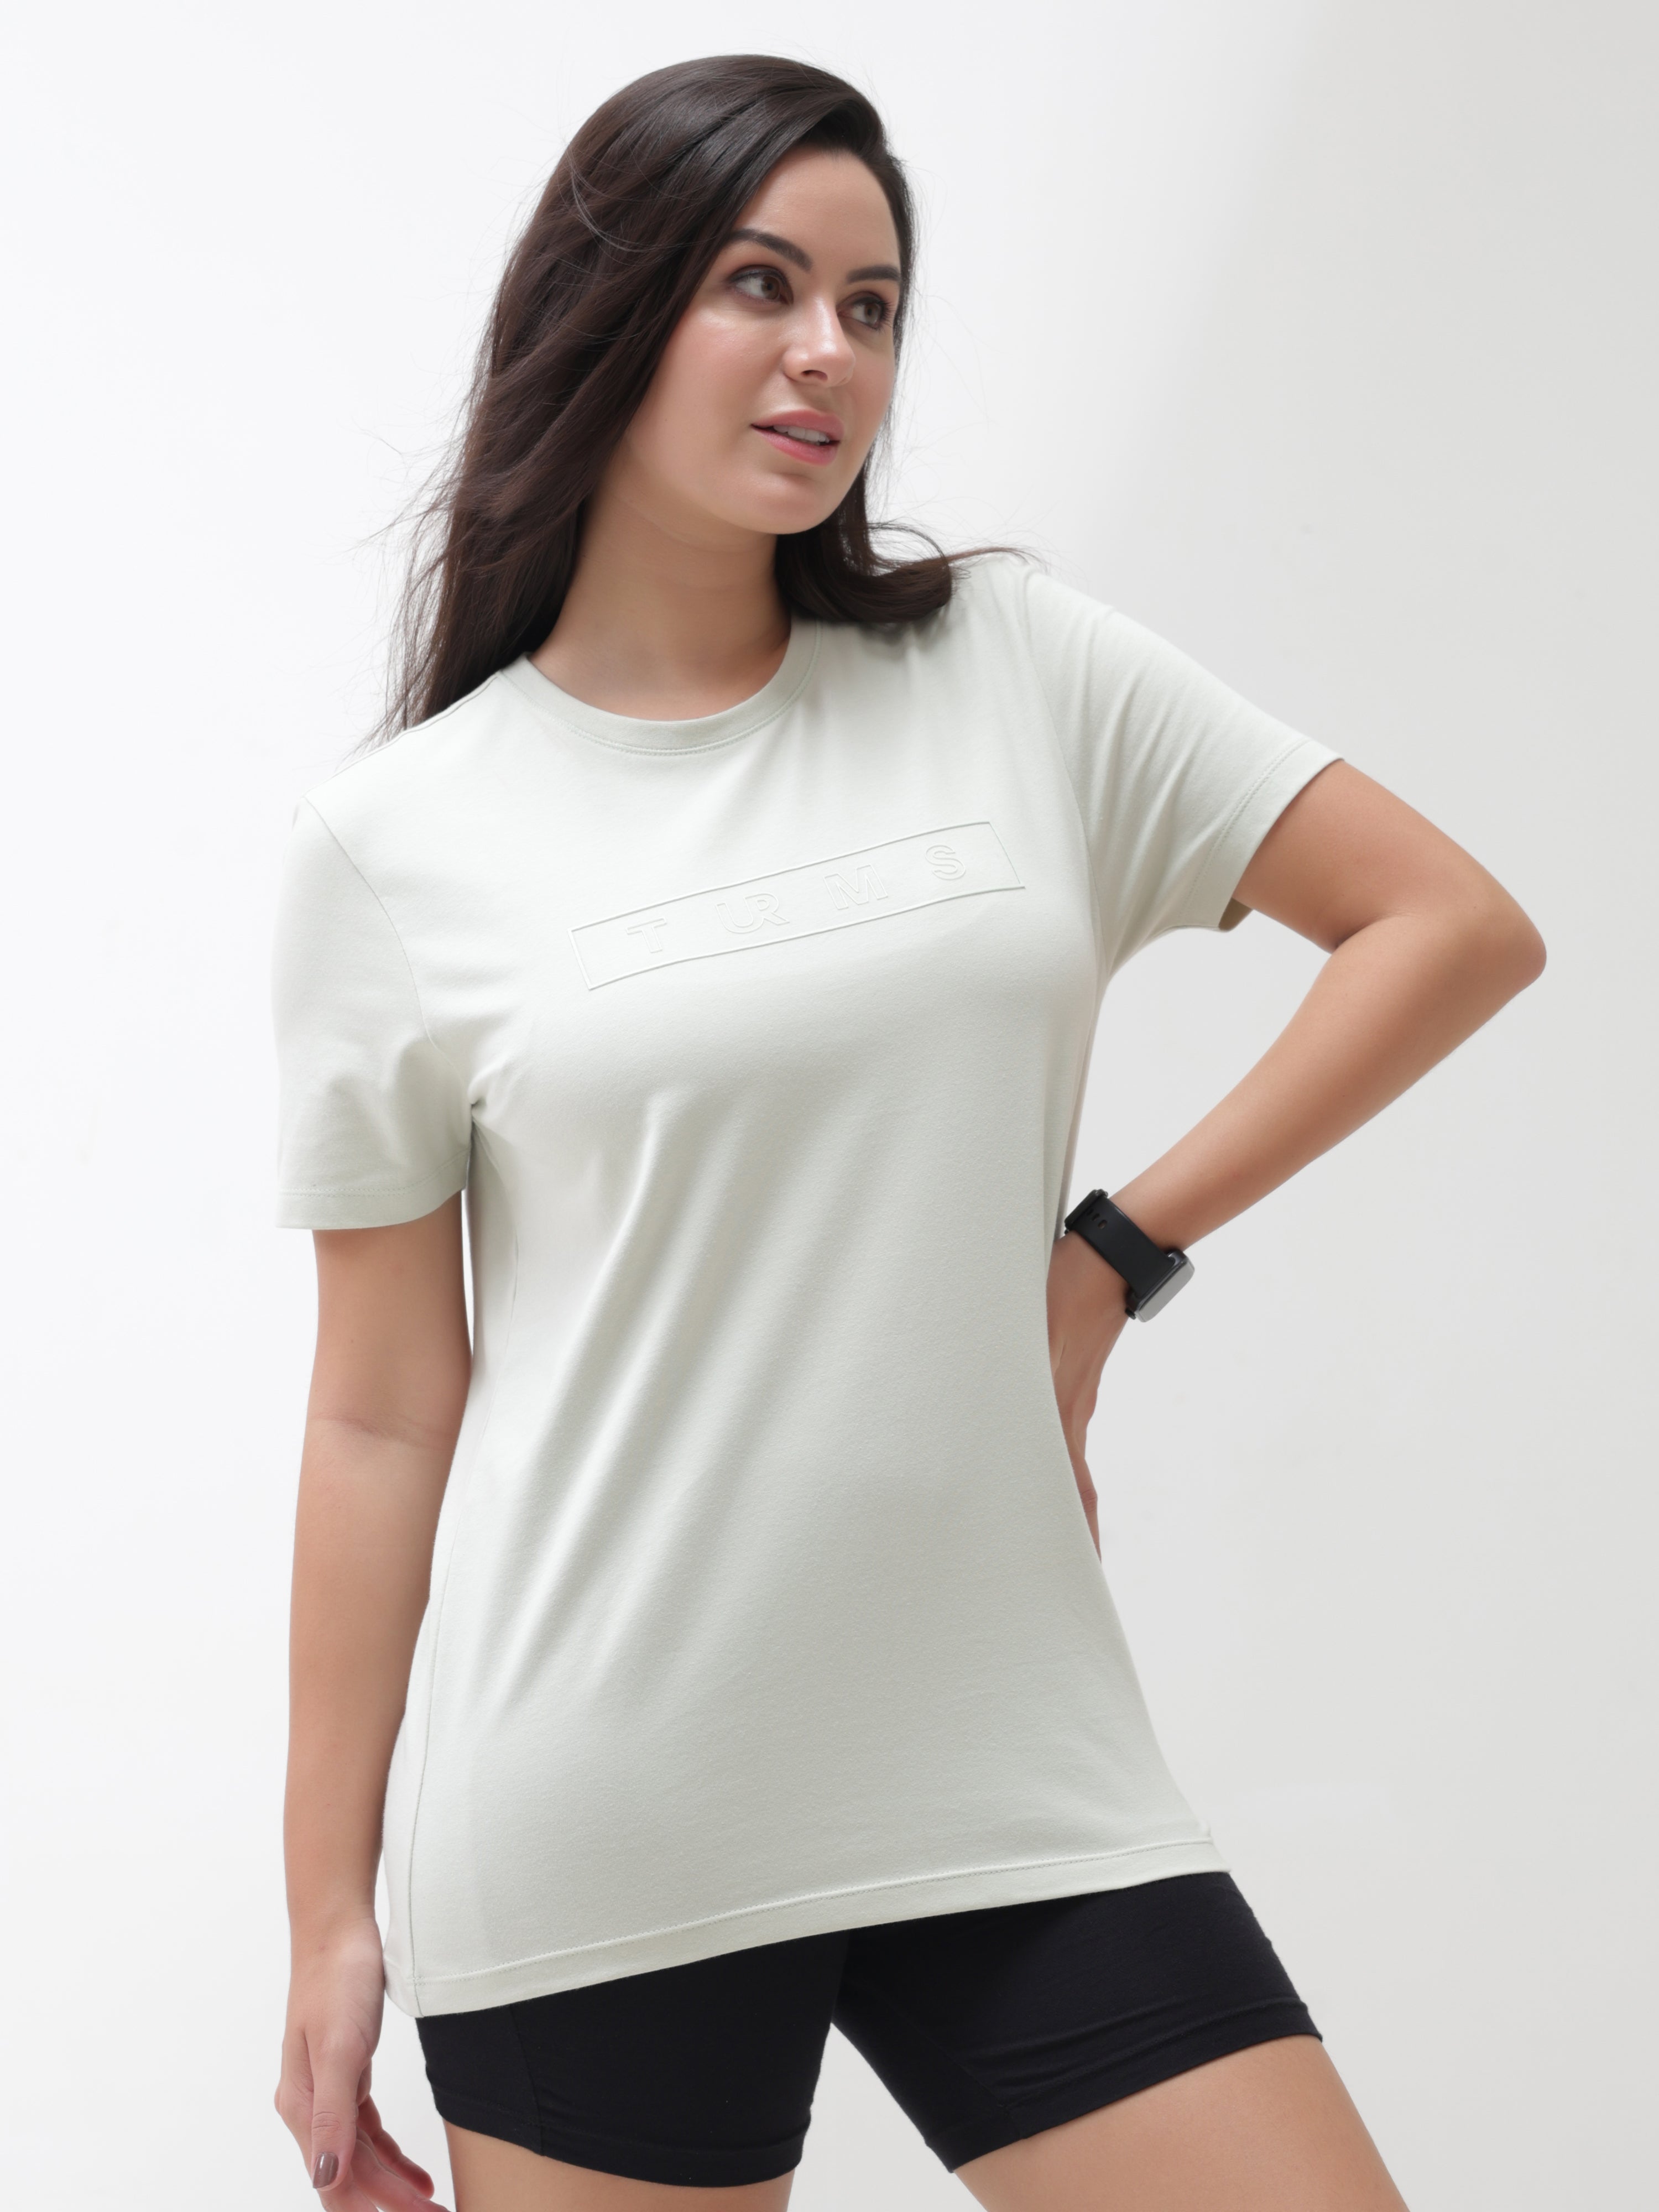 Woman wearing Lime Enigma stain-proof, anti-odor Turms T-shirt. Stretchable, tailored fit, premium cotton-spandex blend. Intelligent apparel.